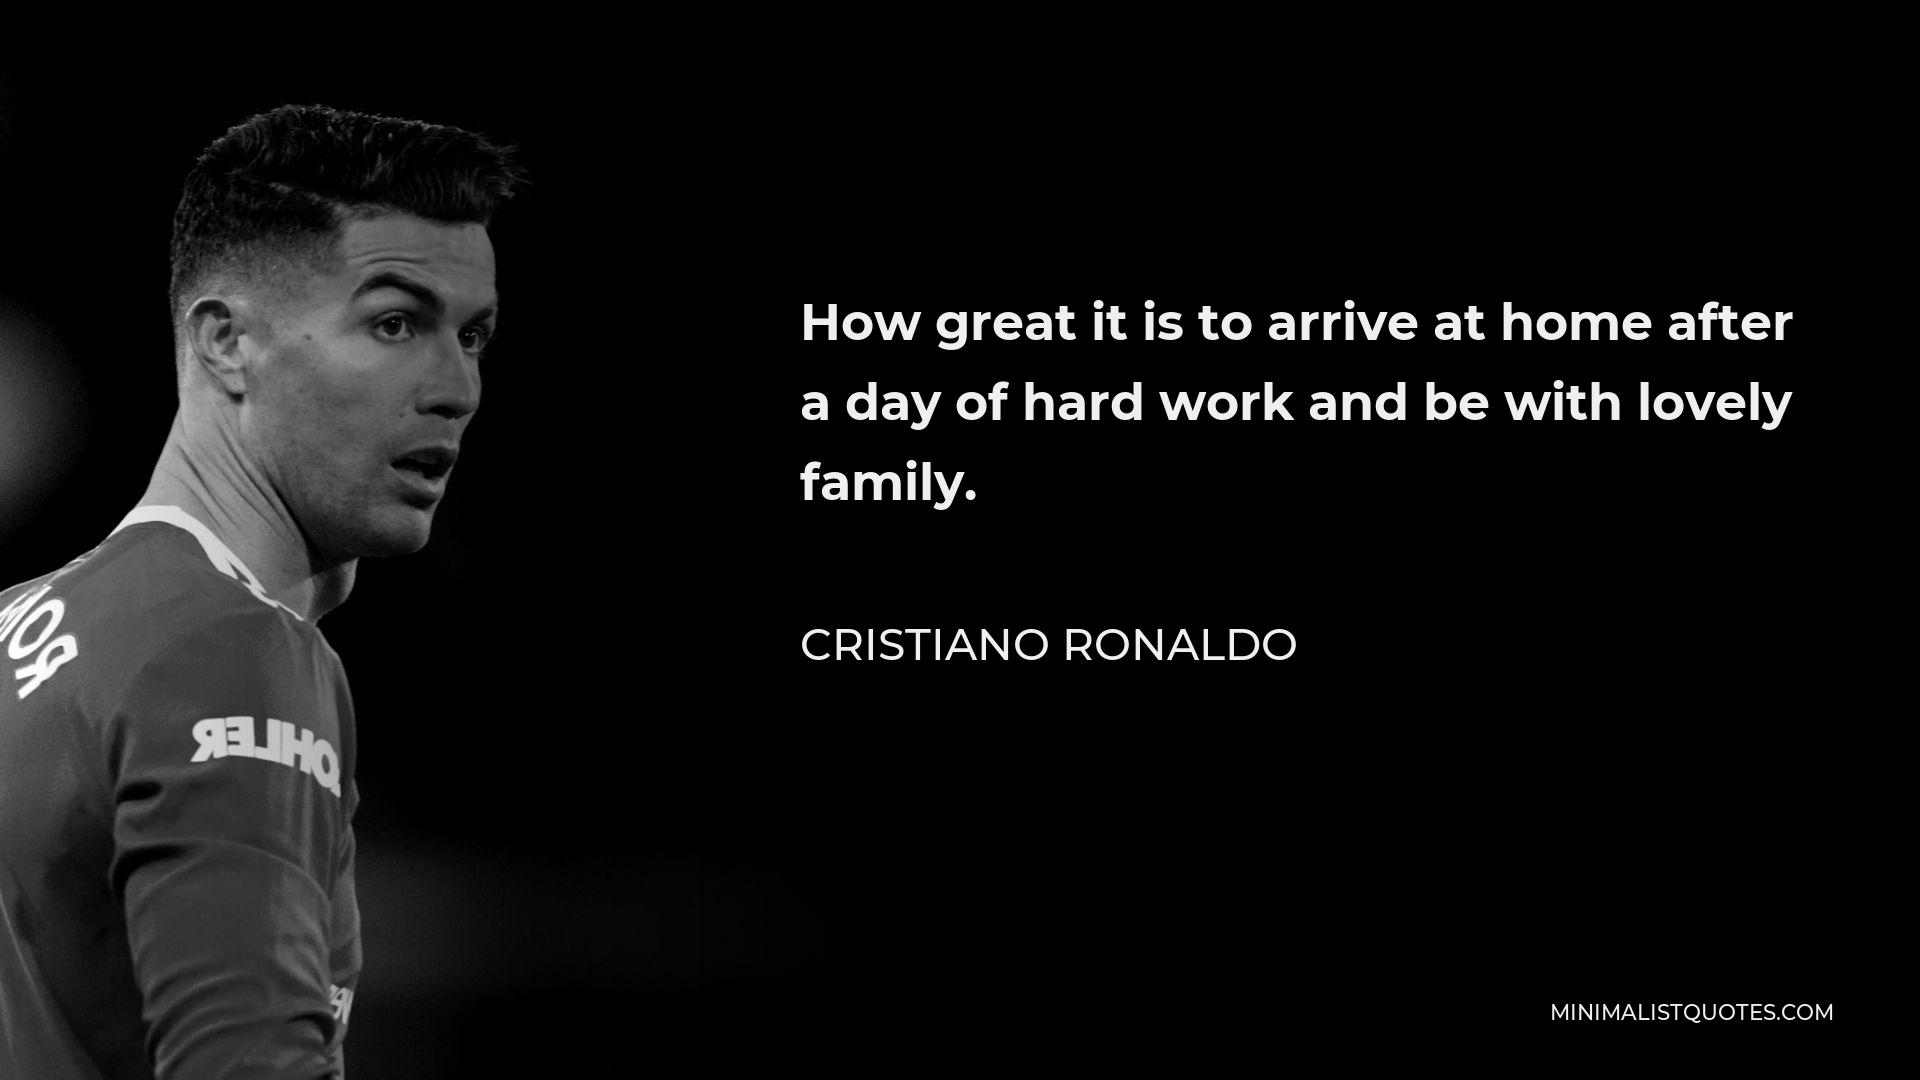 Cristiano Ronaldo Quote - How great it is to arrive at home after a day of hard work and be with lovely family.